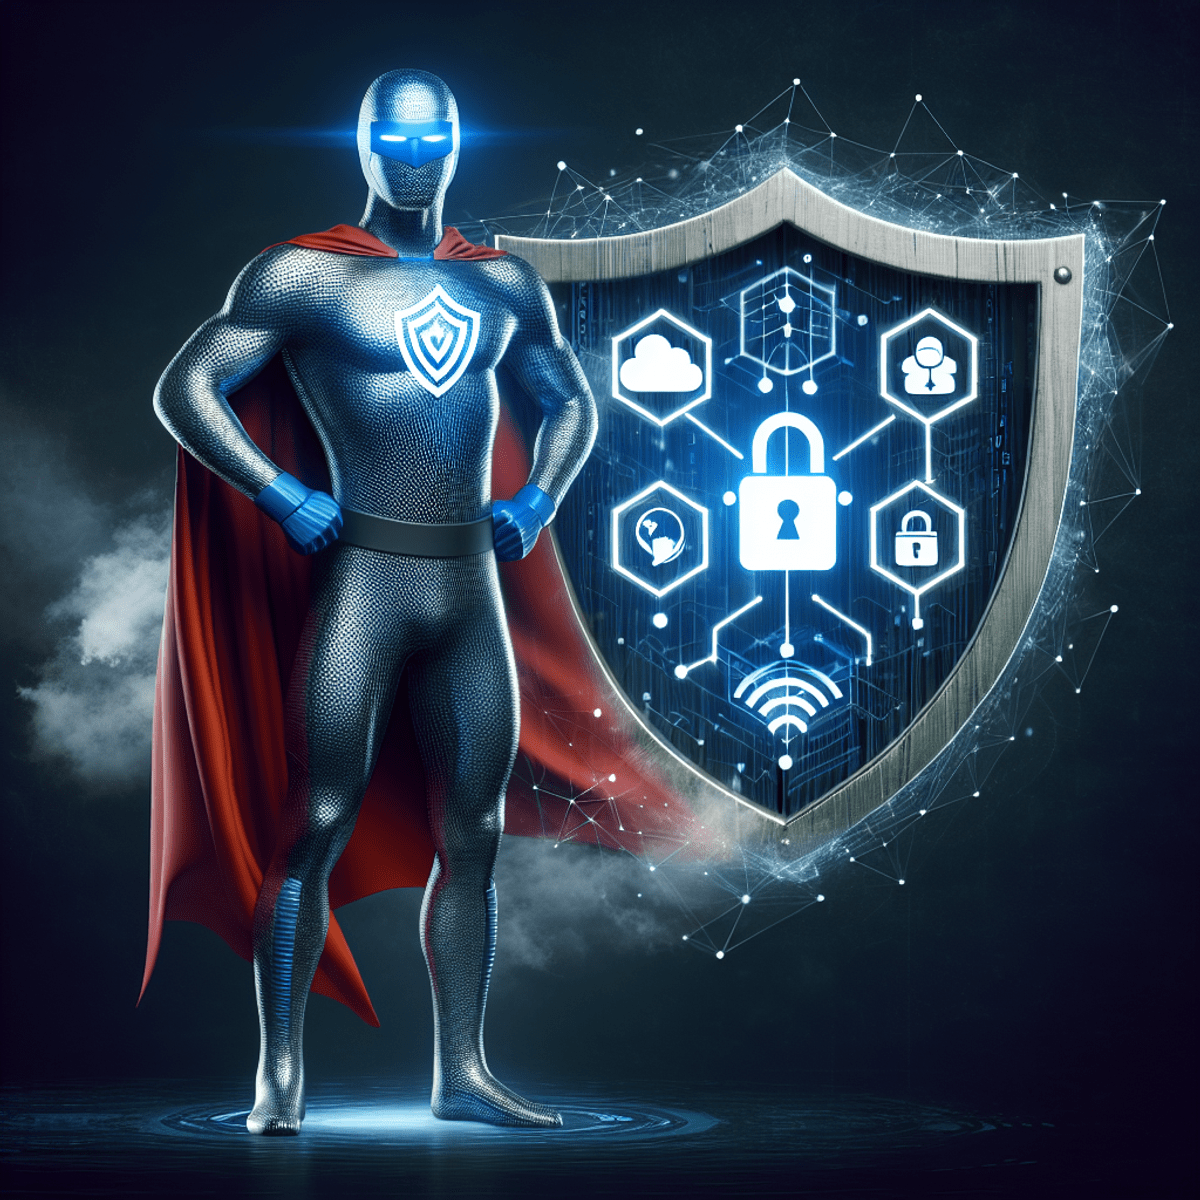 A digital superhero standing confidently with a shield featuring symbols of protection, encryption, and cloud technology.